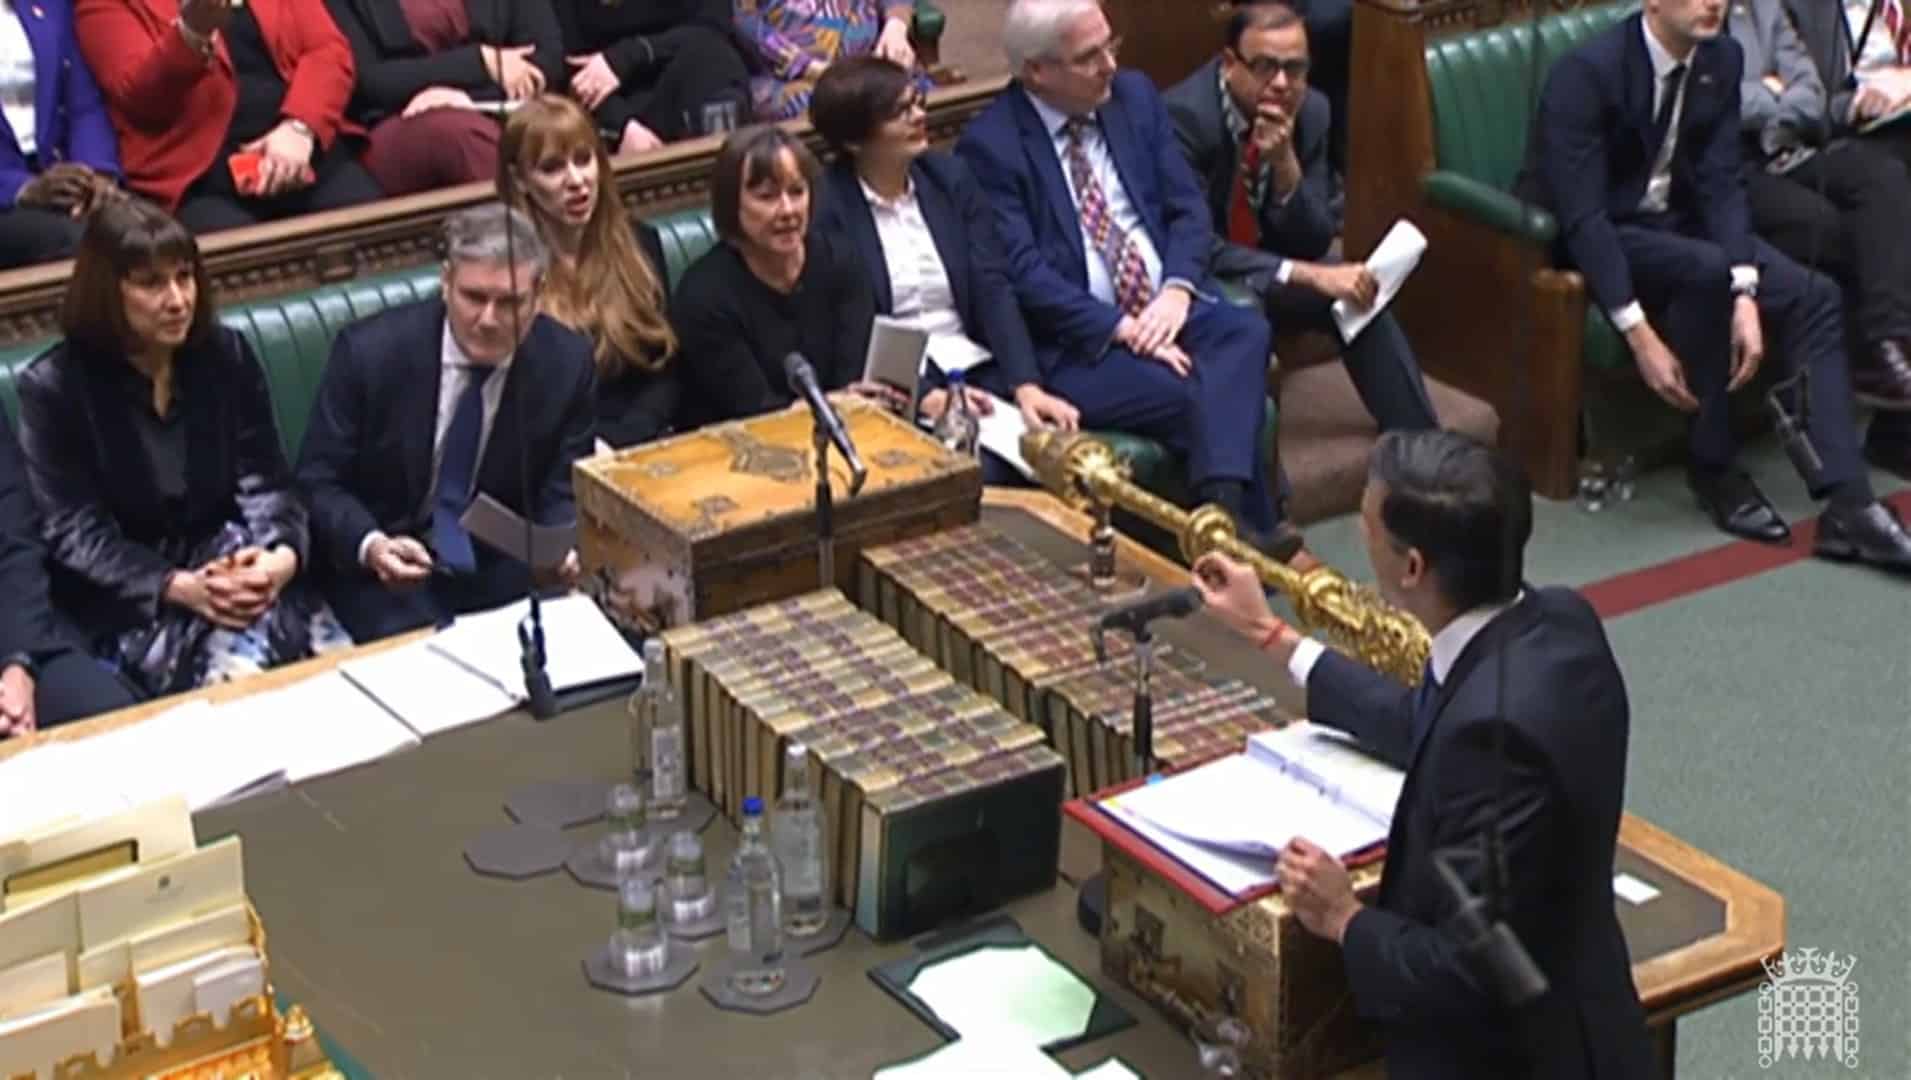 Watch: Sunak brushes off question about Nadhim Zahawi’s tax affairs